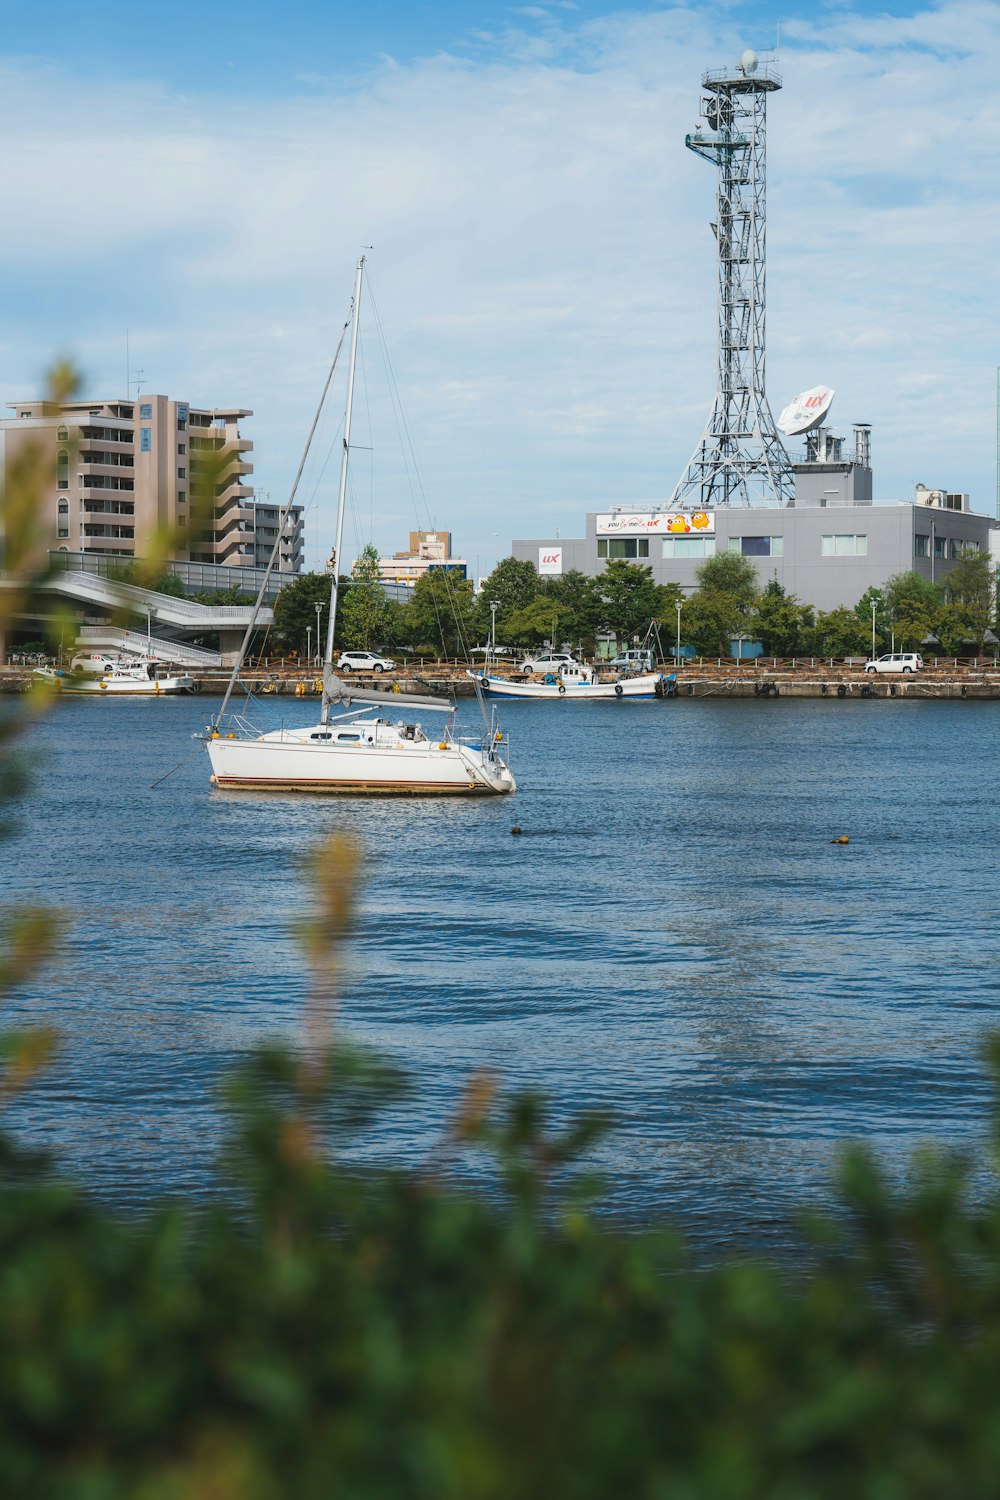 a sailboat in the water with a city in the background